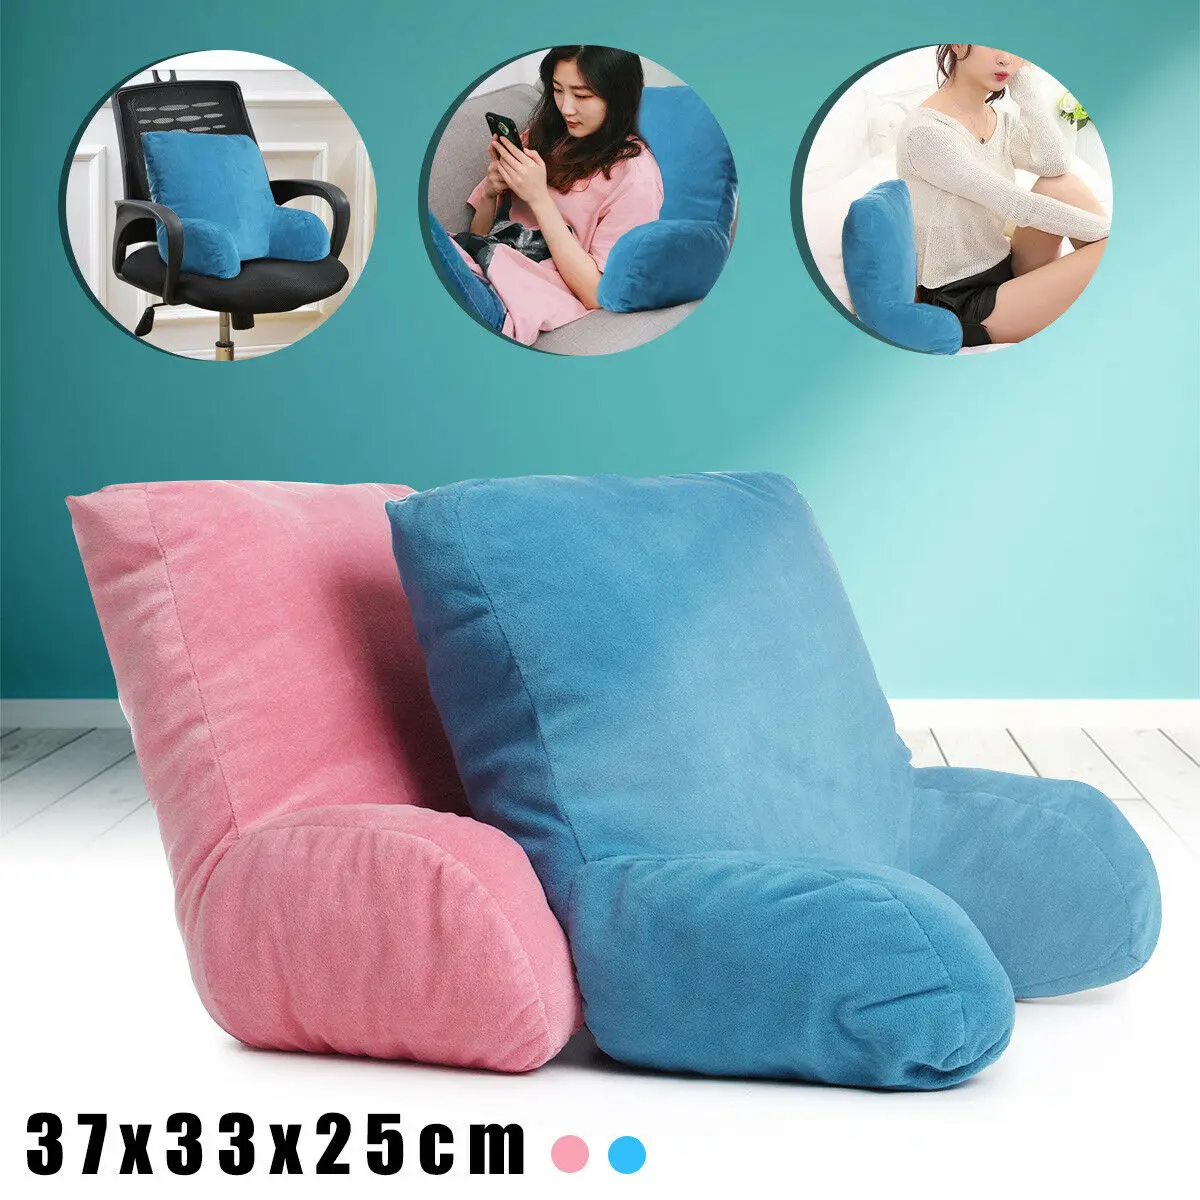 Lounger Bed Rest Back Pillow Support Arm Stable TV Reading Backrest Seat Cushion